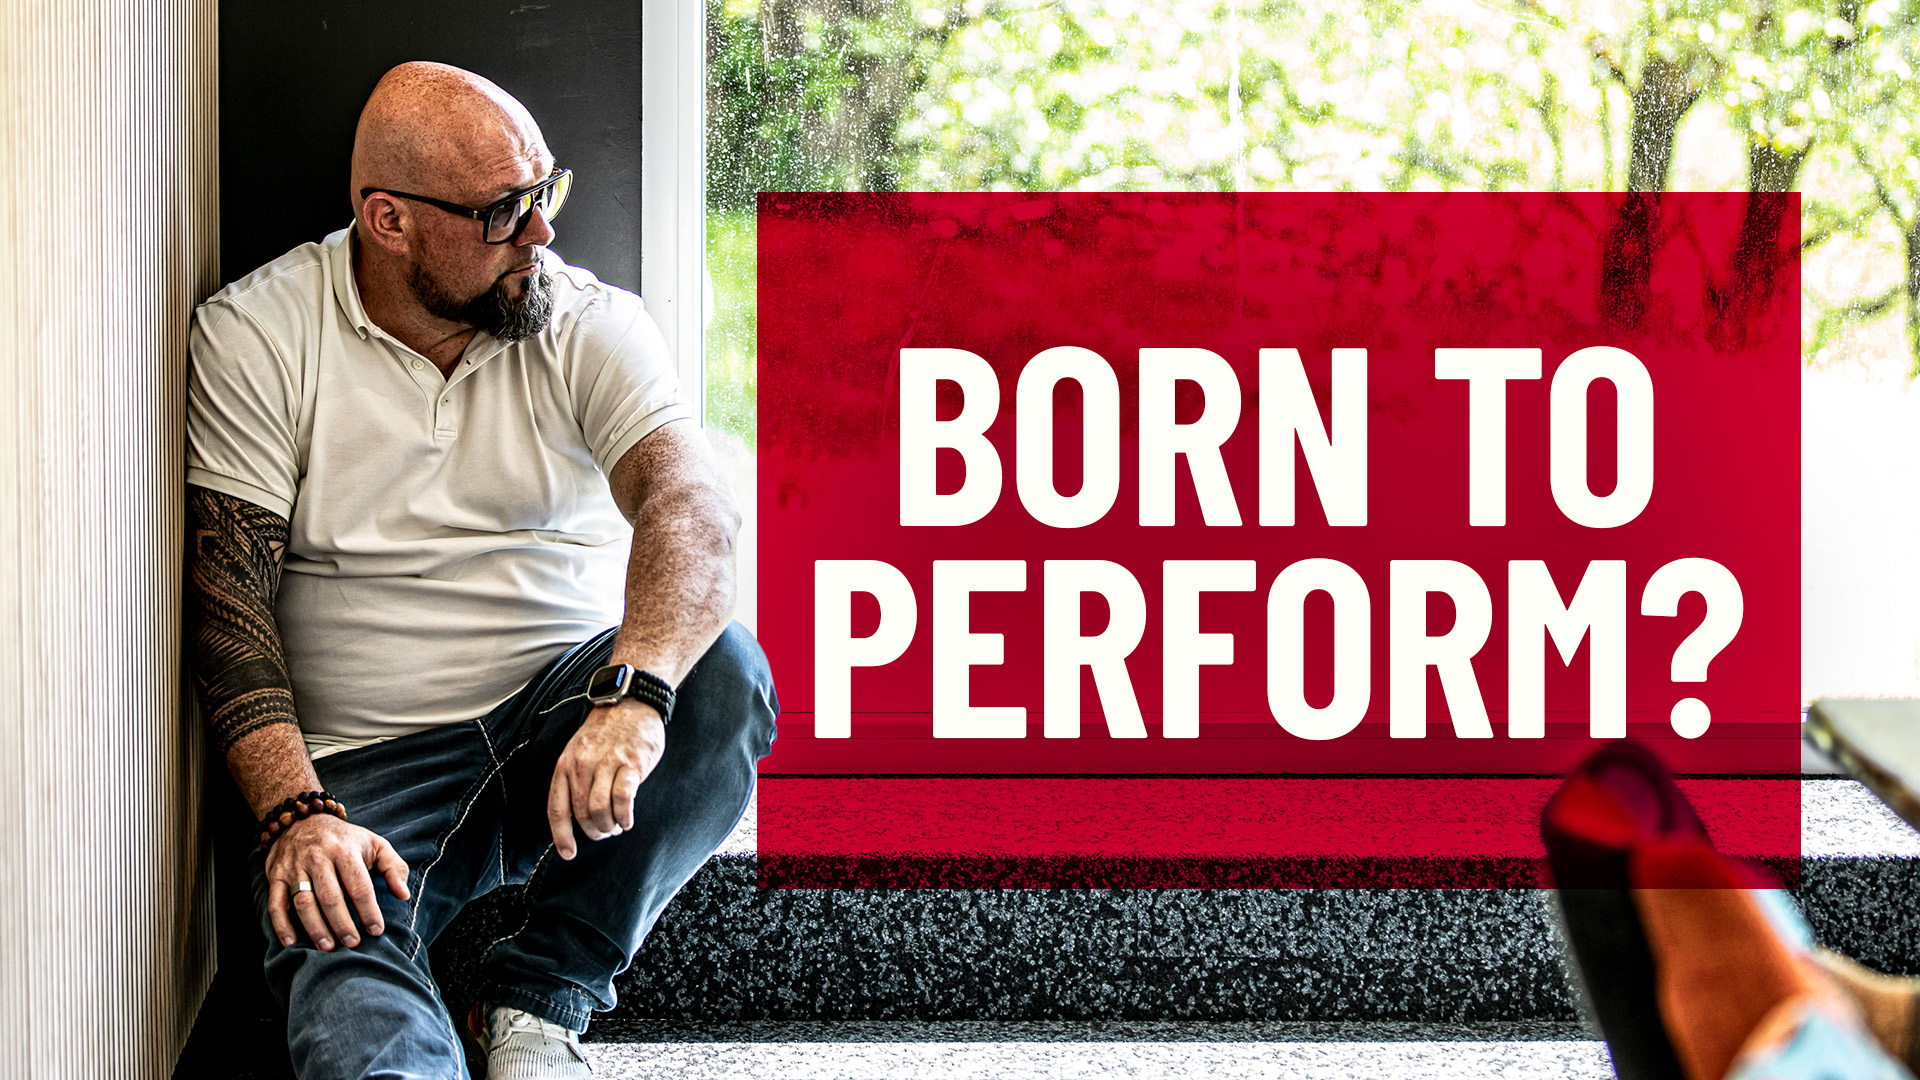 selbstoptimierung-born-to-perform